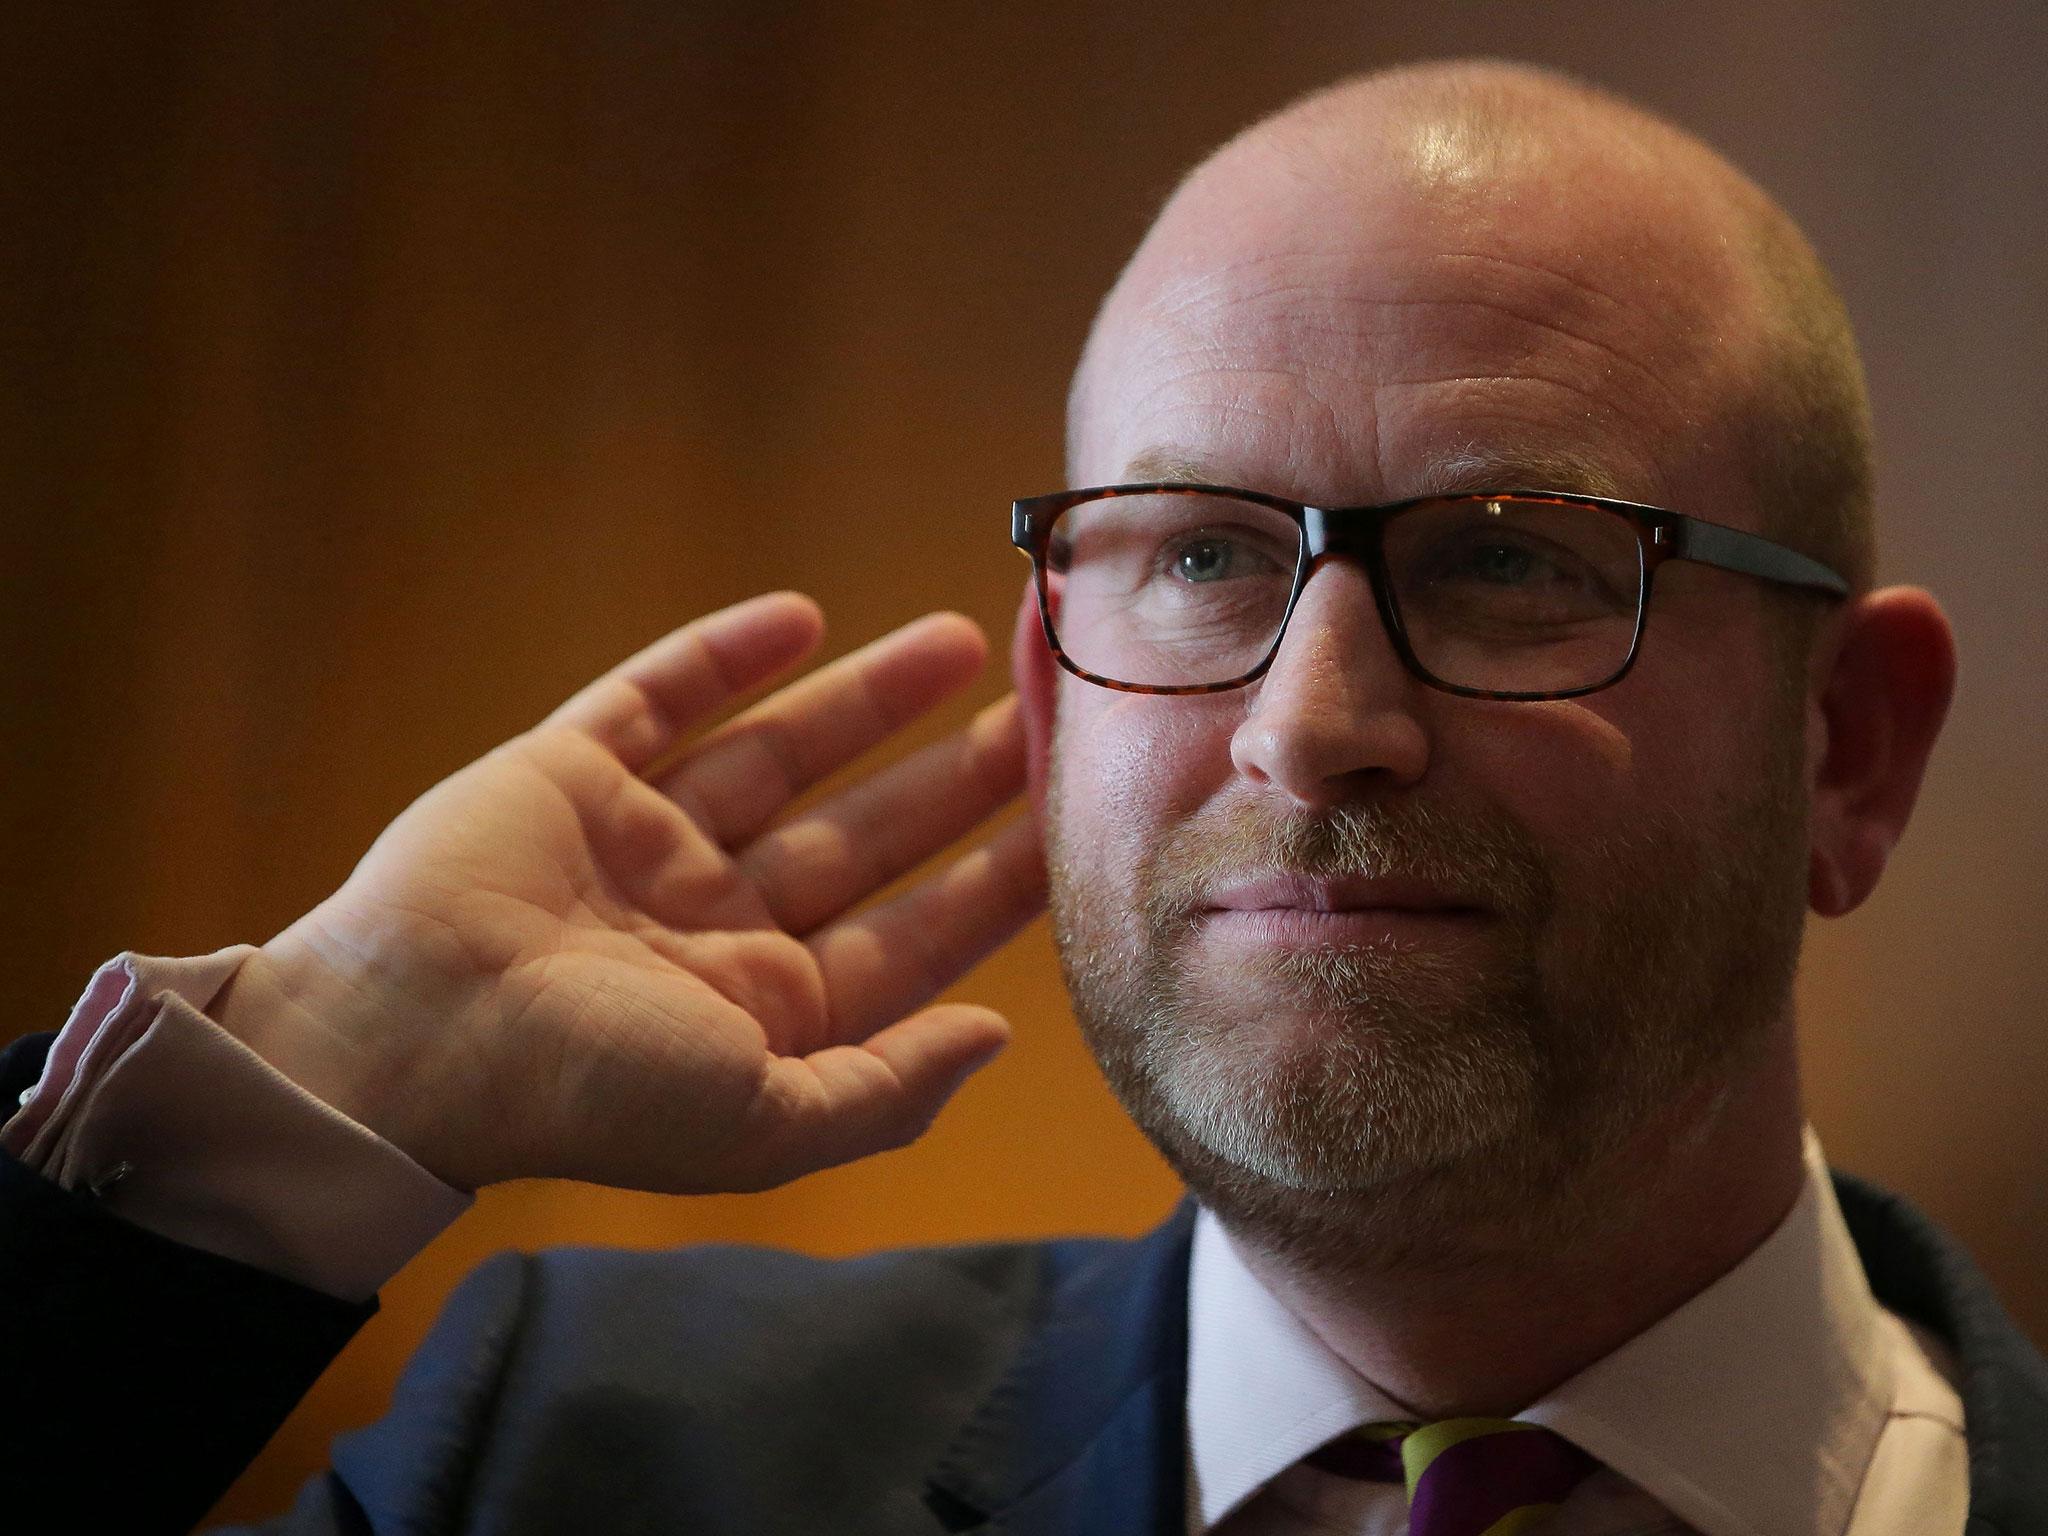 'We welcome the opportunity to take Ukip's positive message to the country,' Paul Nuttall says